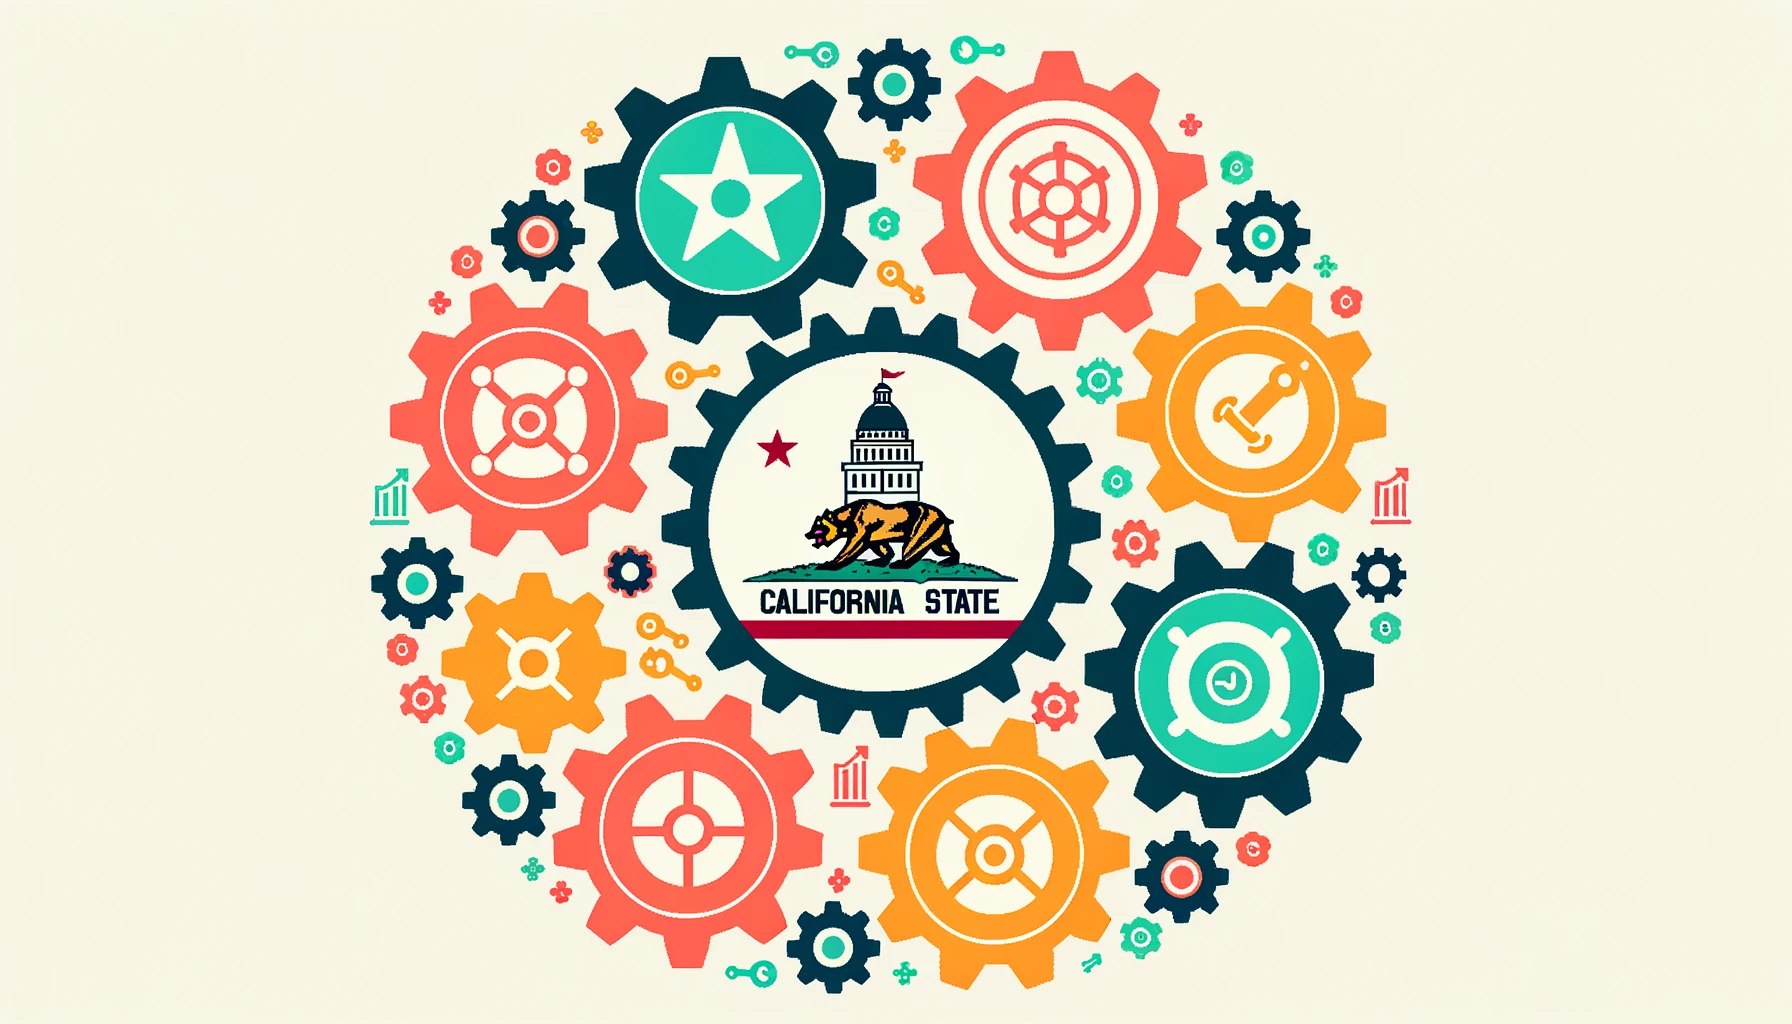 Illustration of a California state emblem surrounded by eight interconnected gears, each representing one of the LCAP's priority areas. The gears are turning in harmony, symbolizing the integrated efforts for student success.